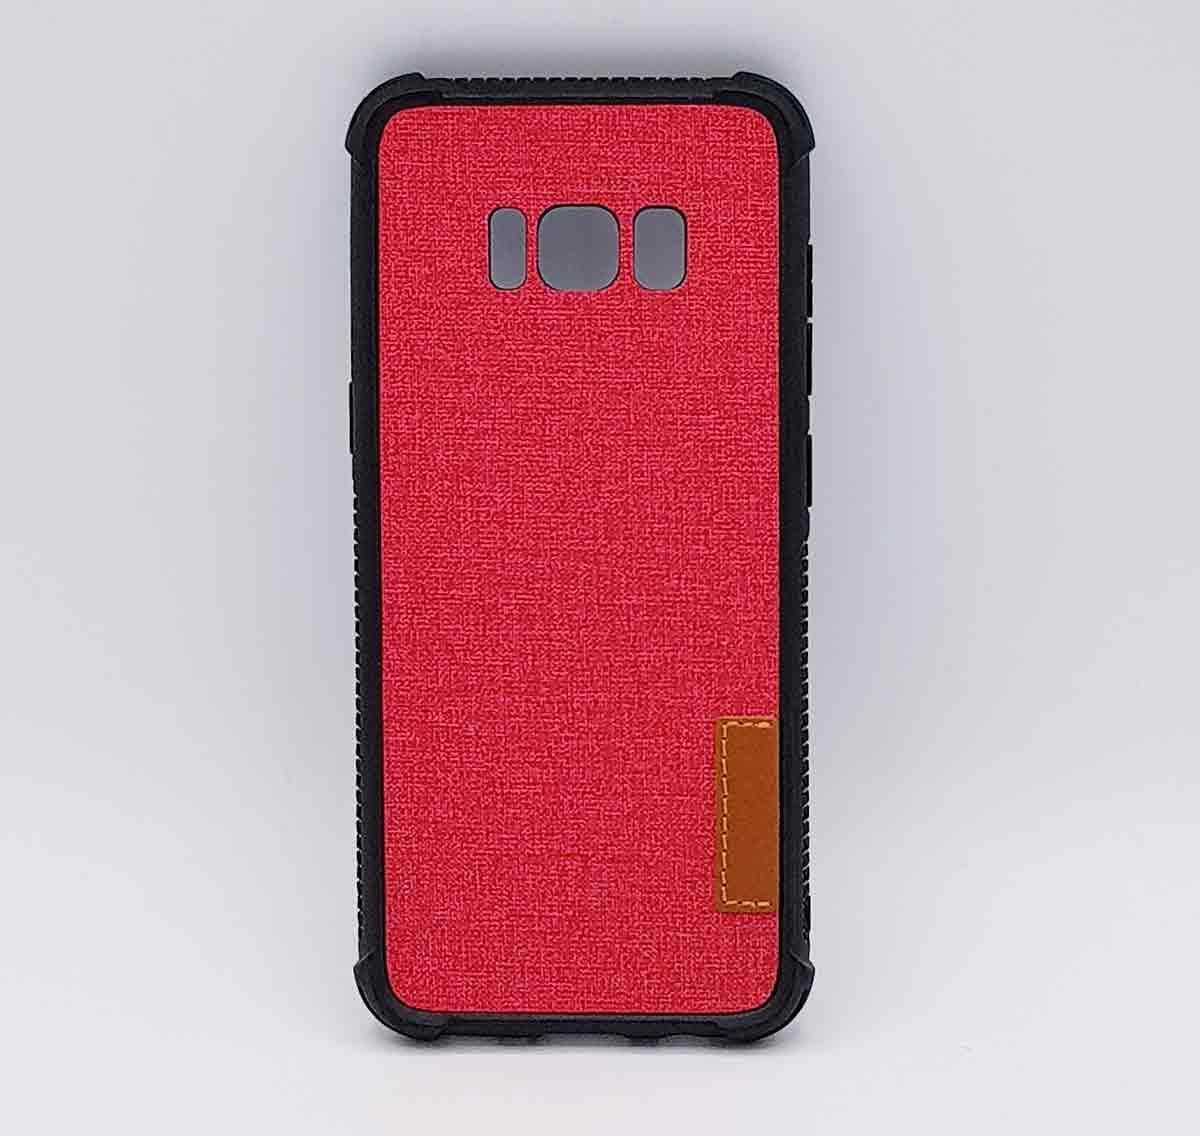 Voor Samsung Galaxy S8 – hoes, cover – TPU – Jeanslook – Rood